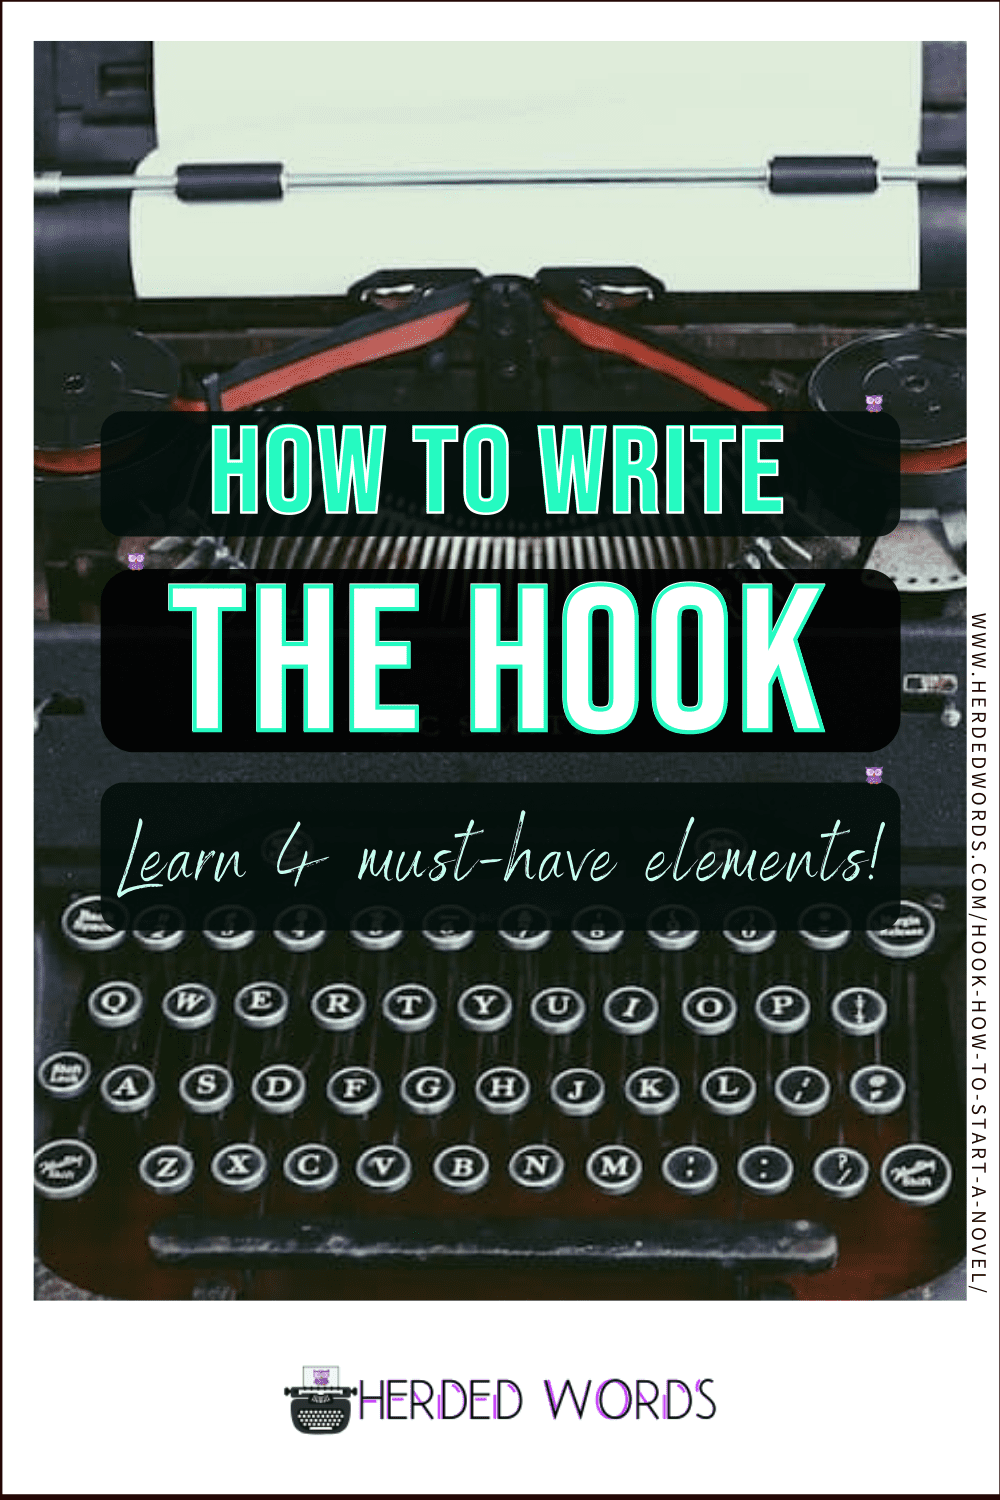 Image link to how to write the hook (learn the 4 must-have elements)